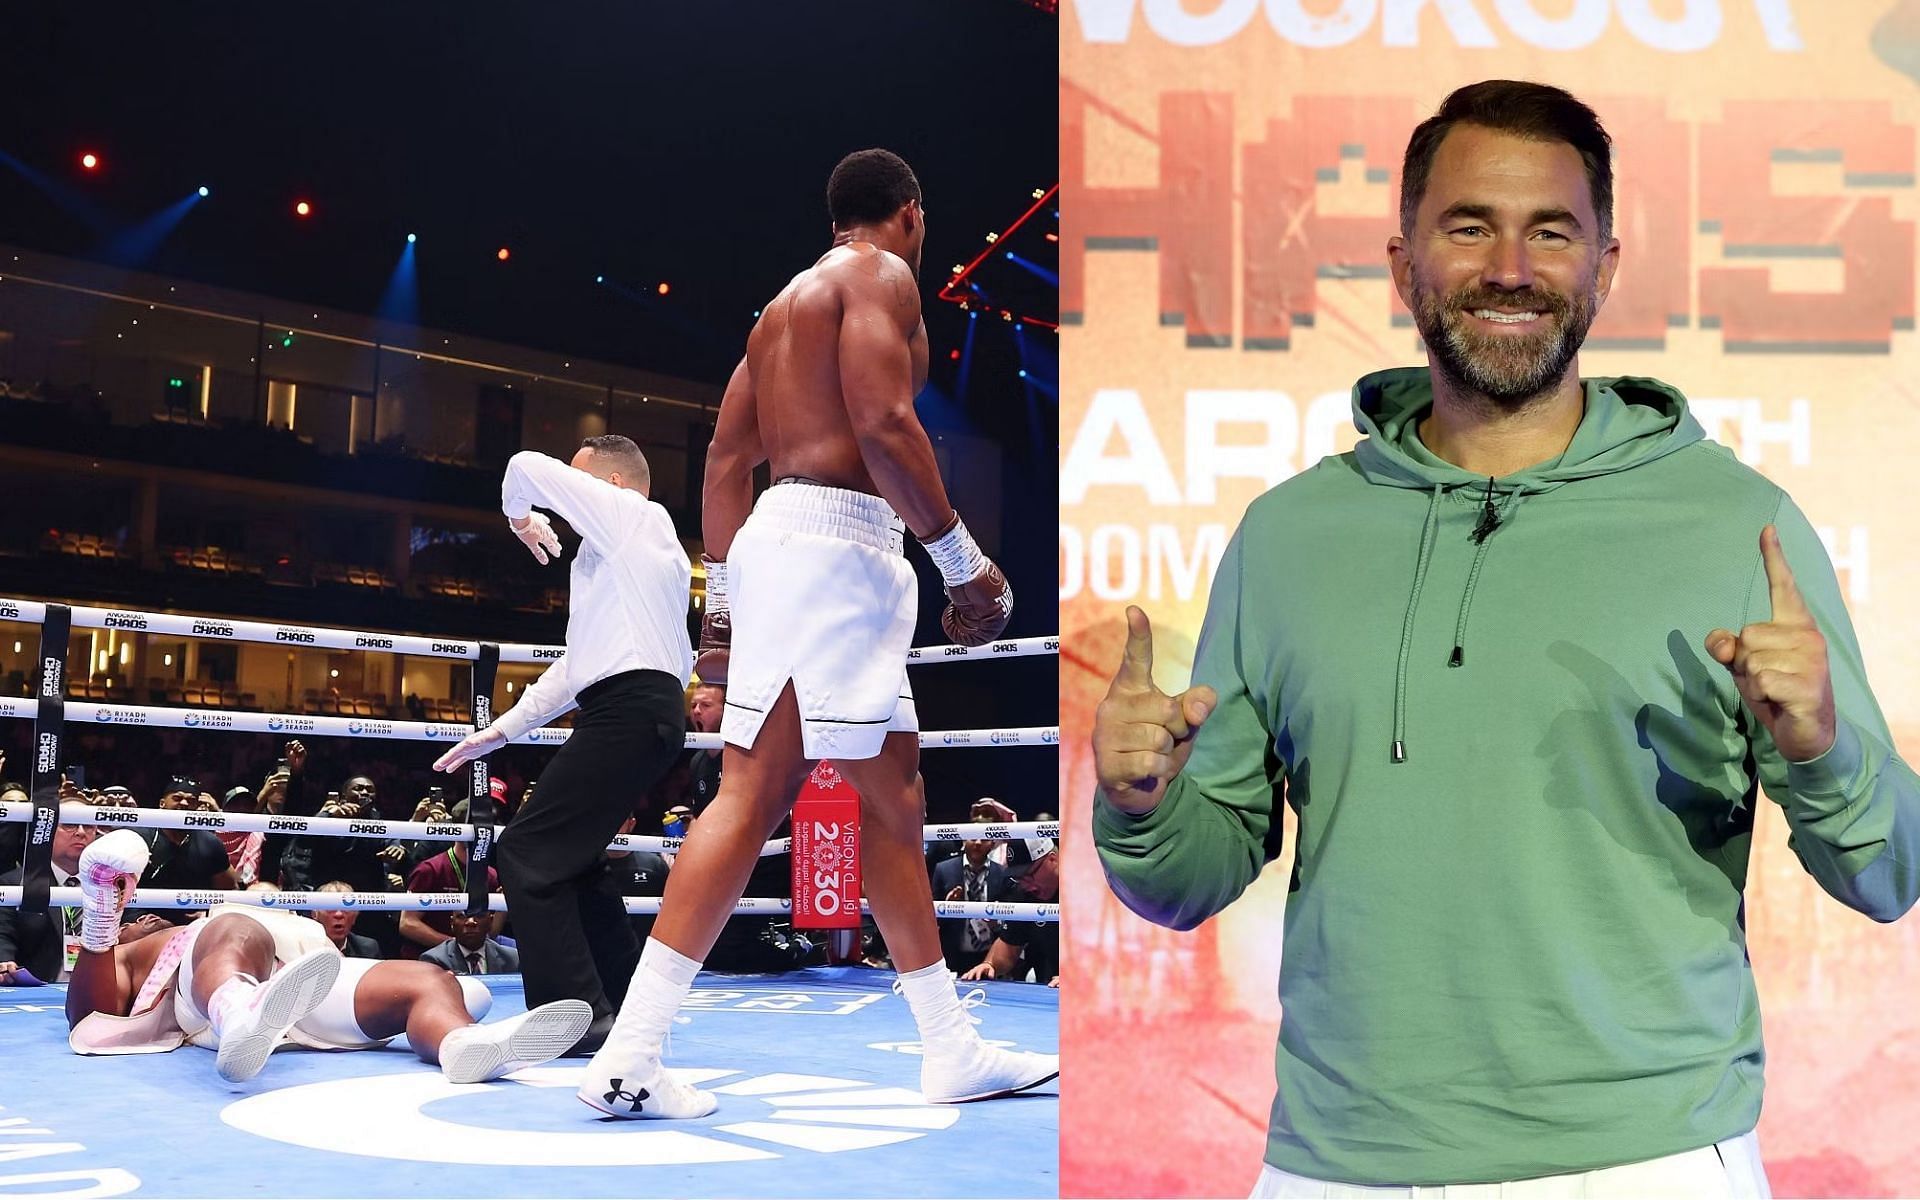 Eddie Hearn (right) says Anthony Joshua is the best heavyweight boxer in the world after KO win over Francis Ngannou (left) [Images Courtesy: @GettyImages]